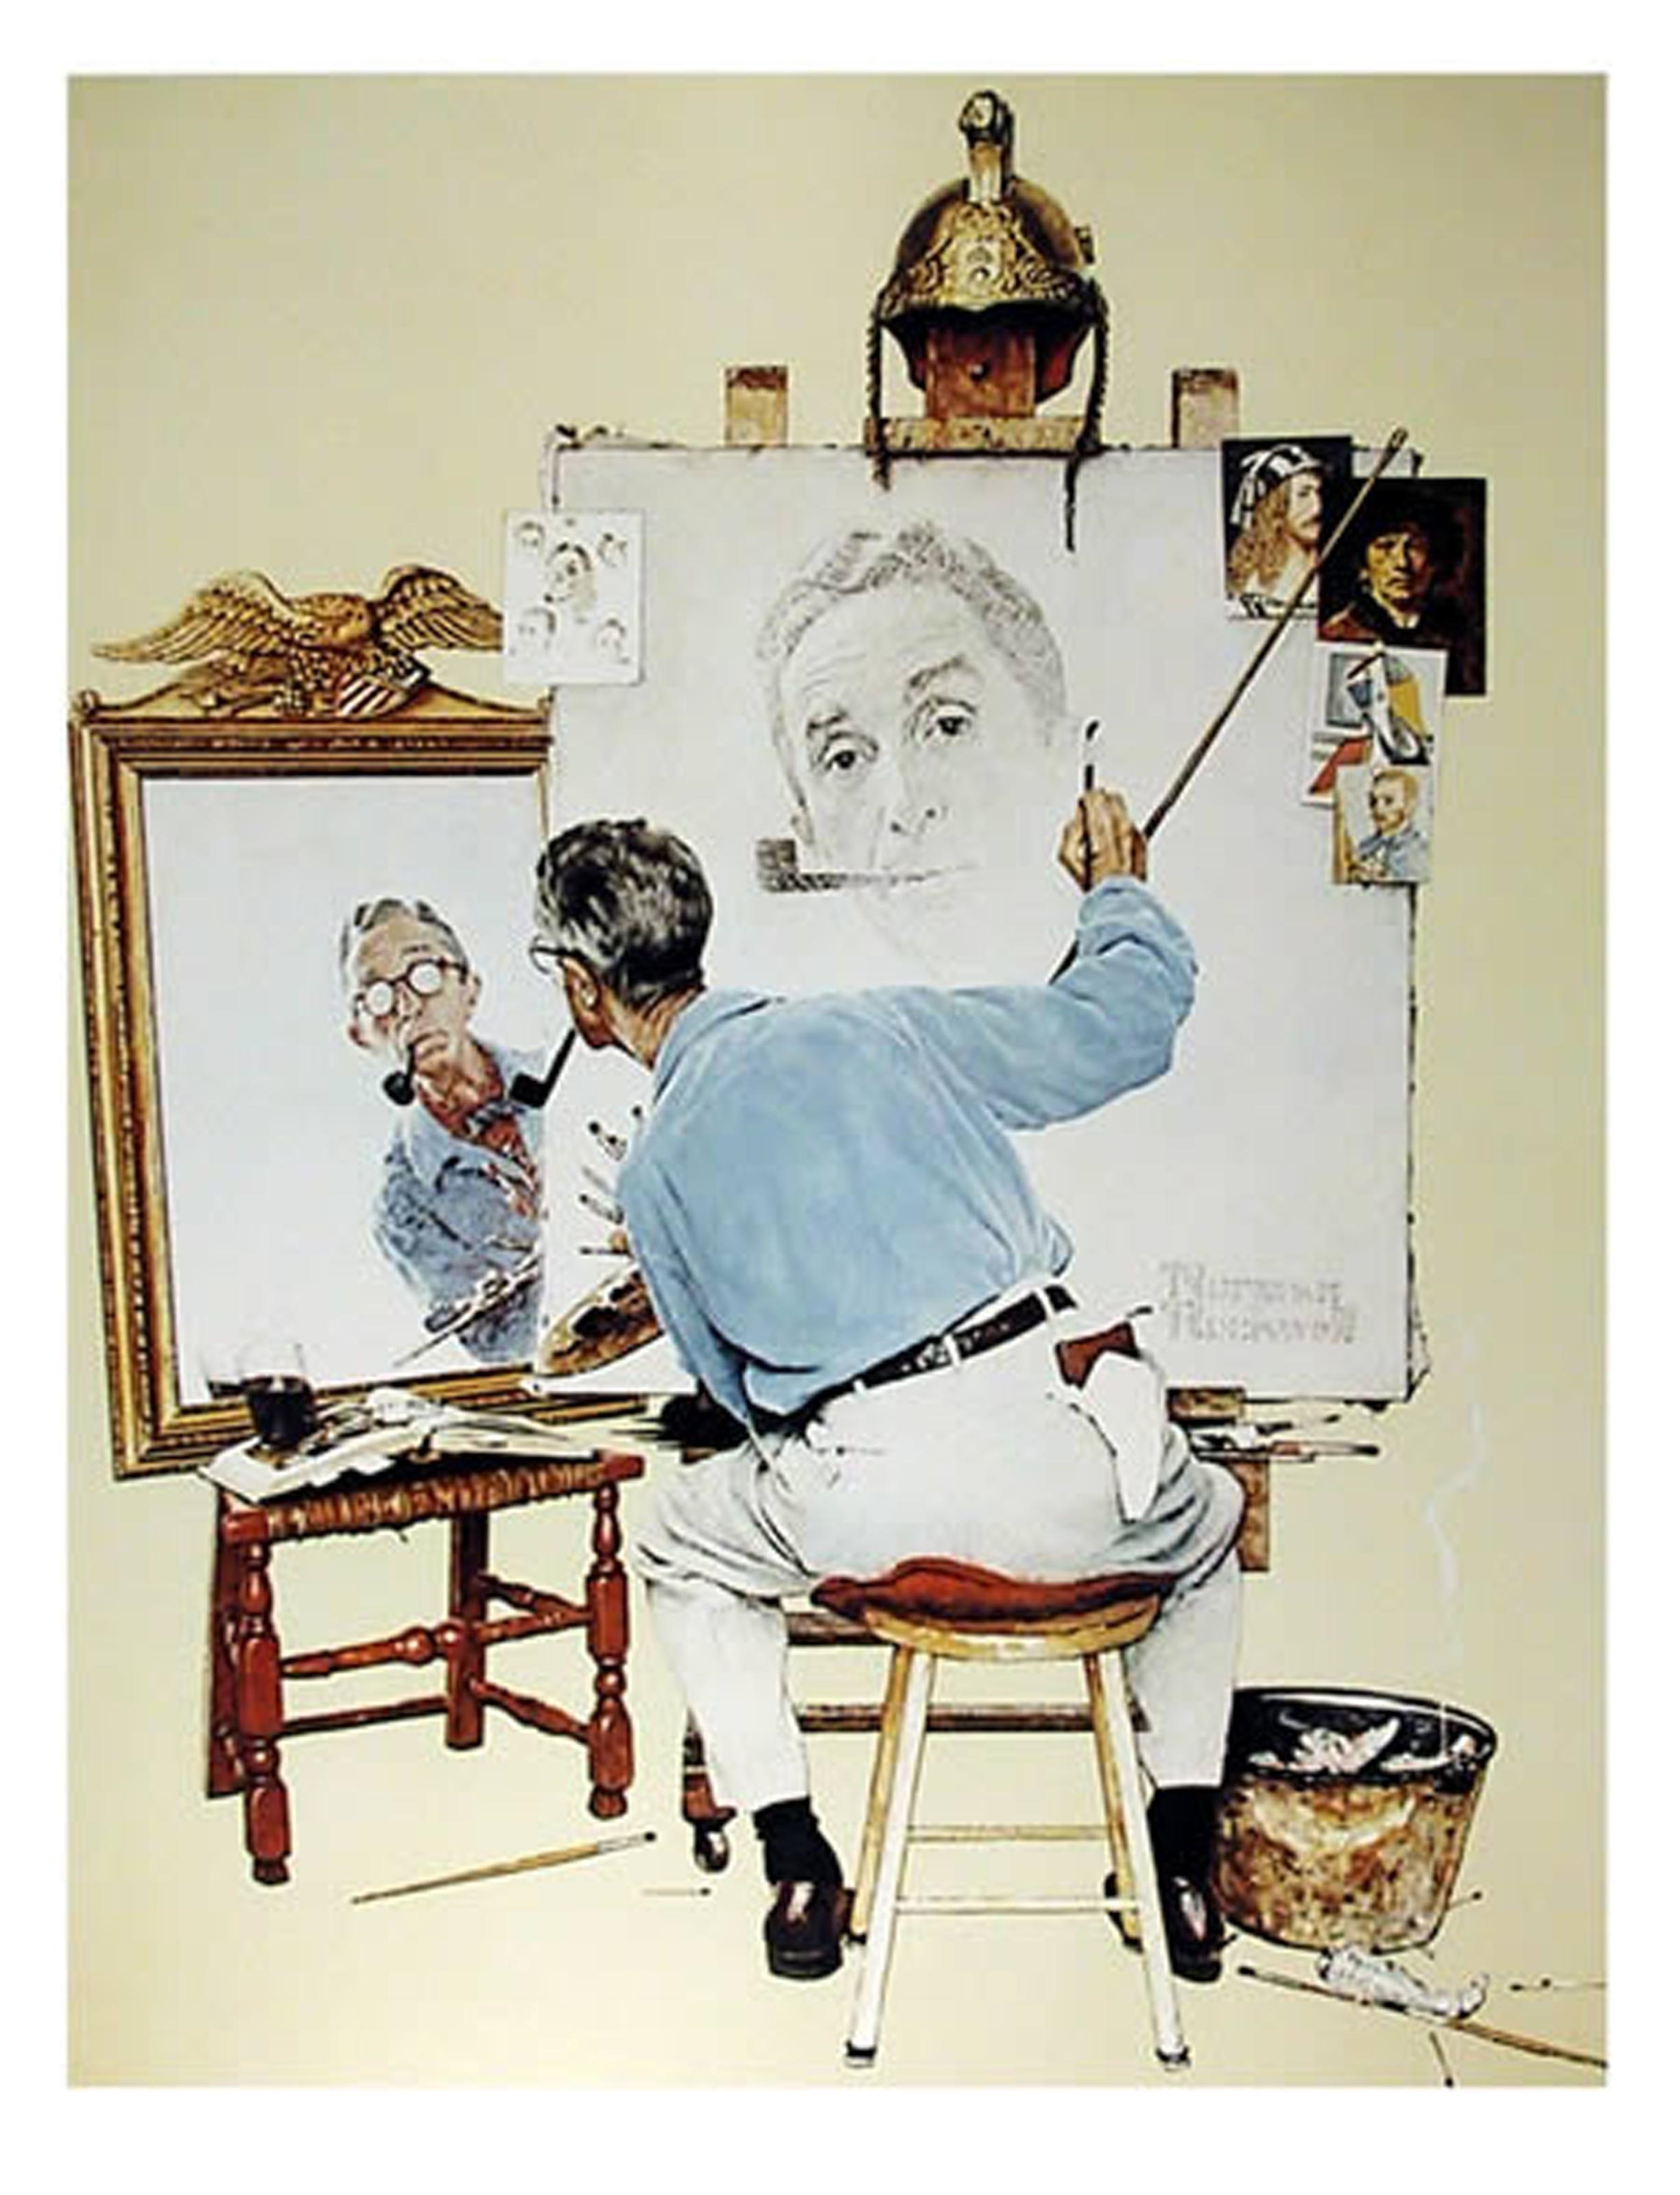 Biography by Norman Rockwell, 1972